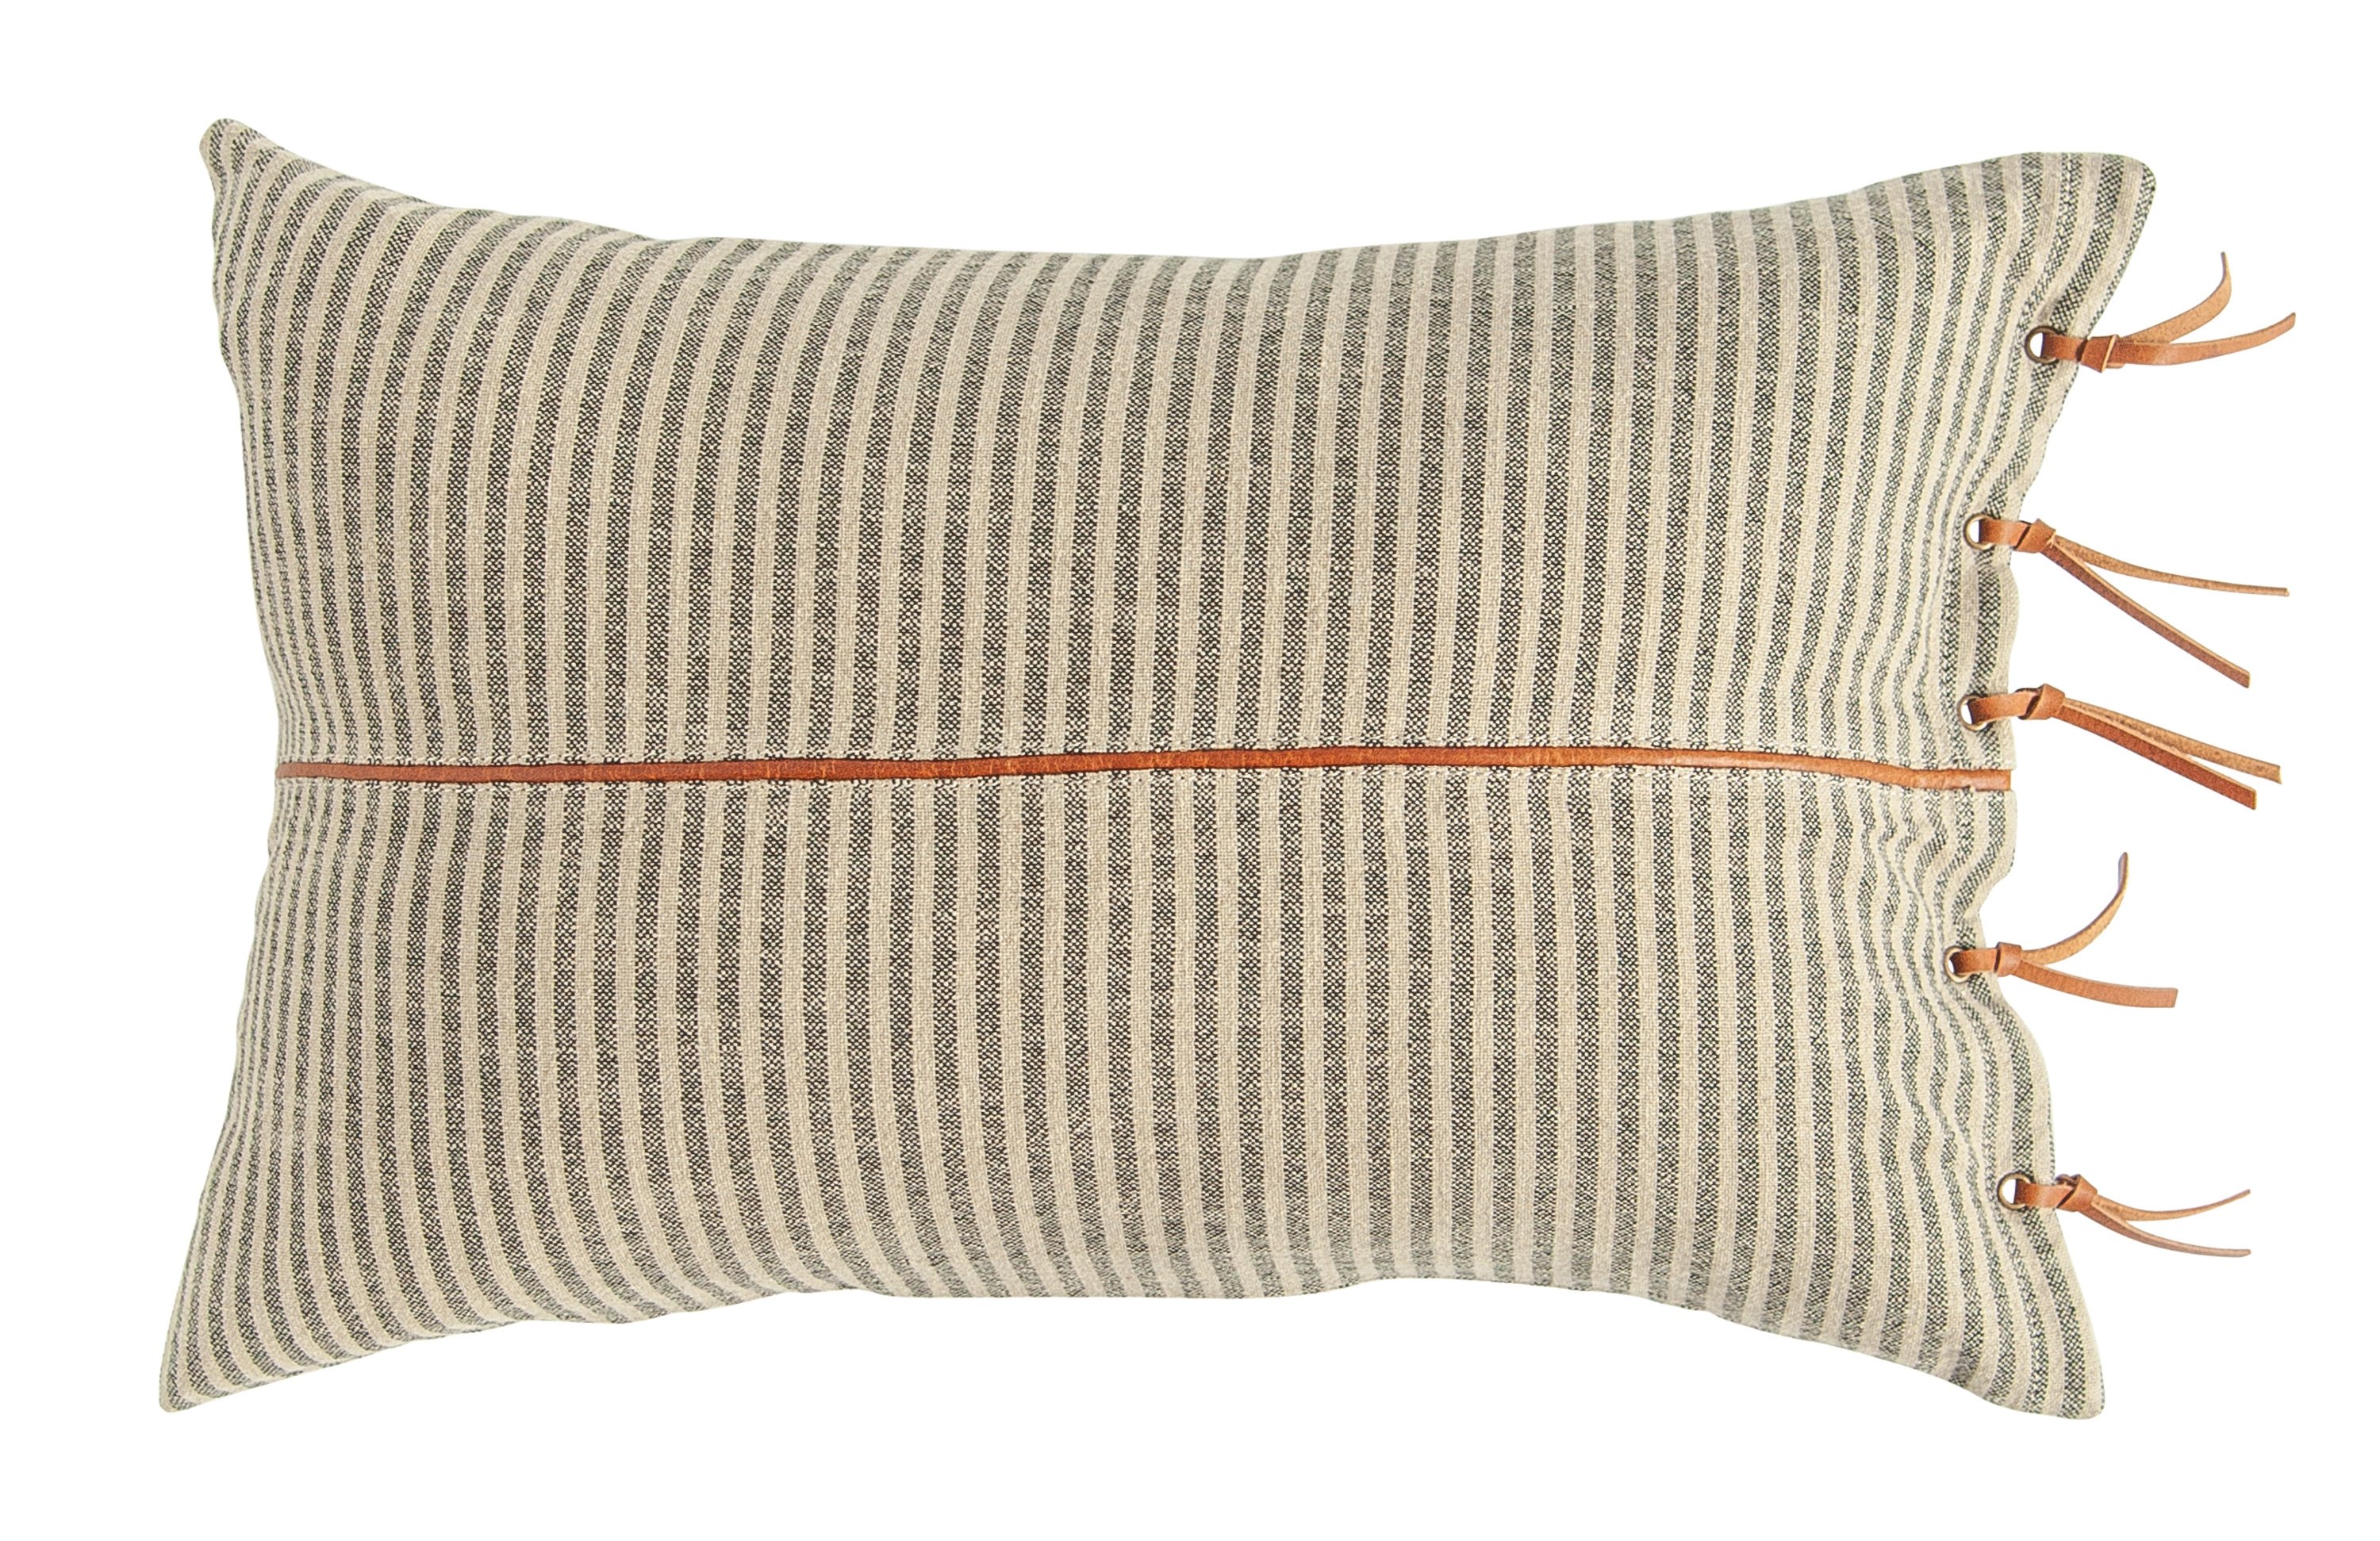 Beige & Black Striped Cotton Ticking Lumbar Pillow with Leather Trim - Image 0